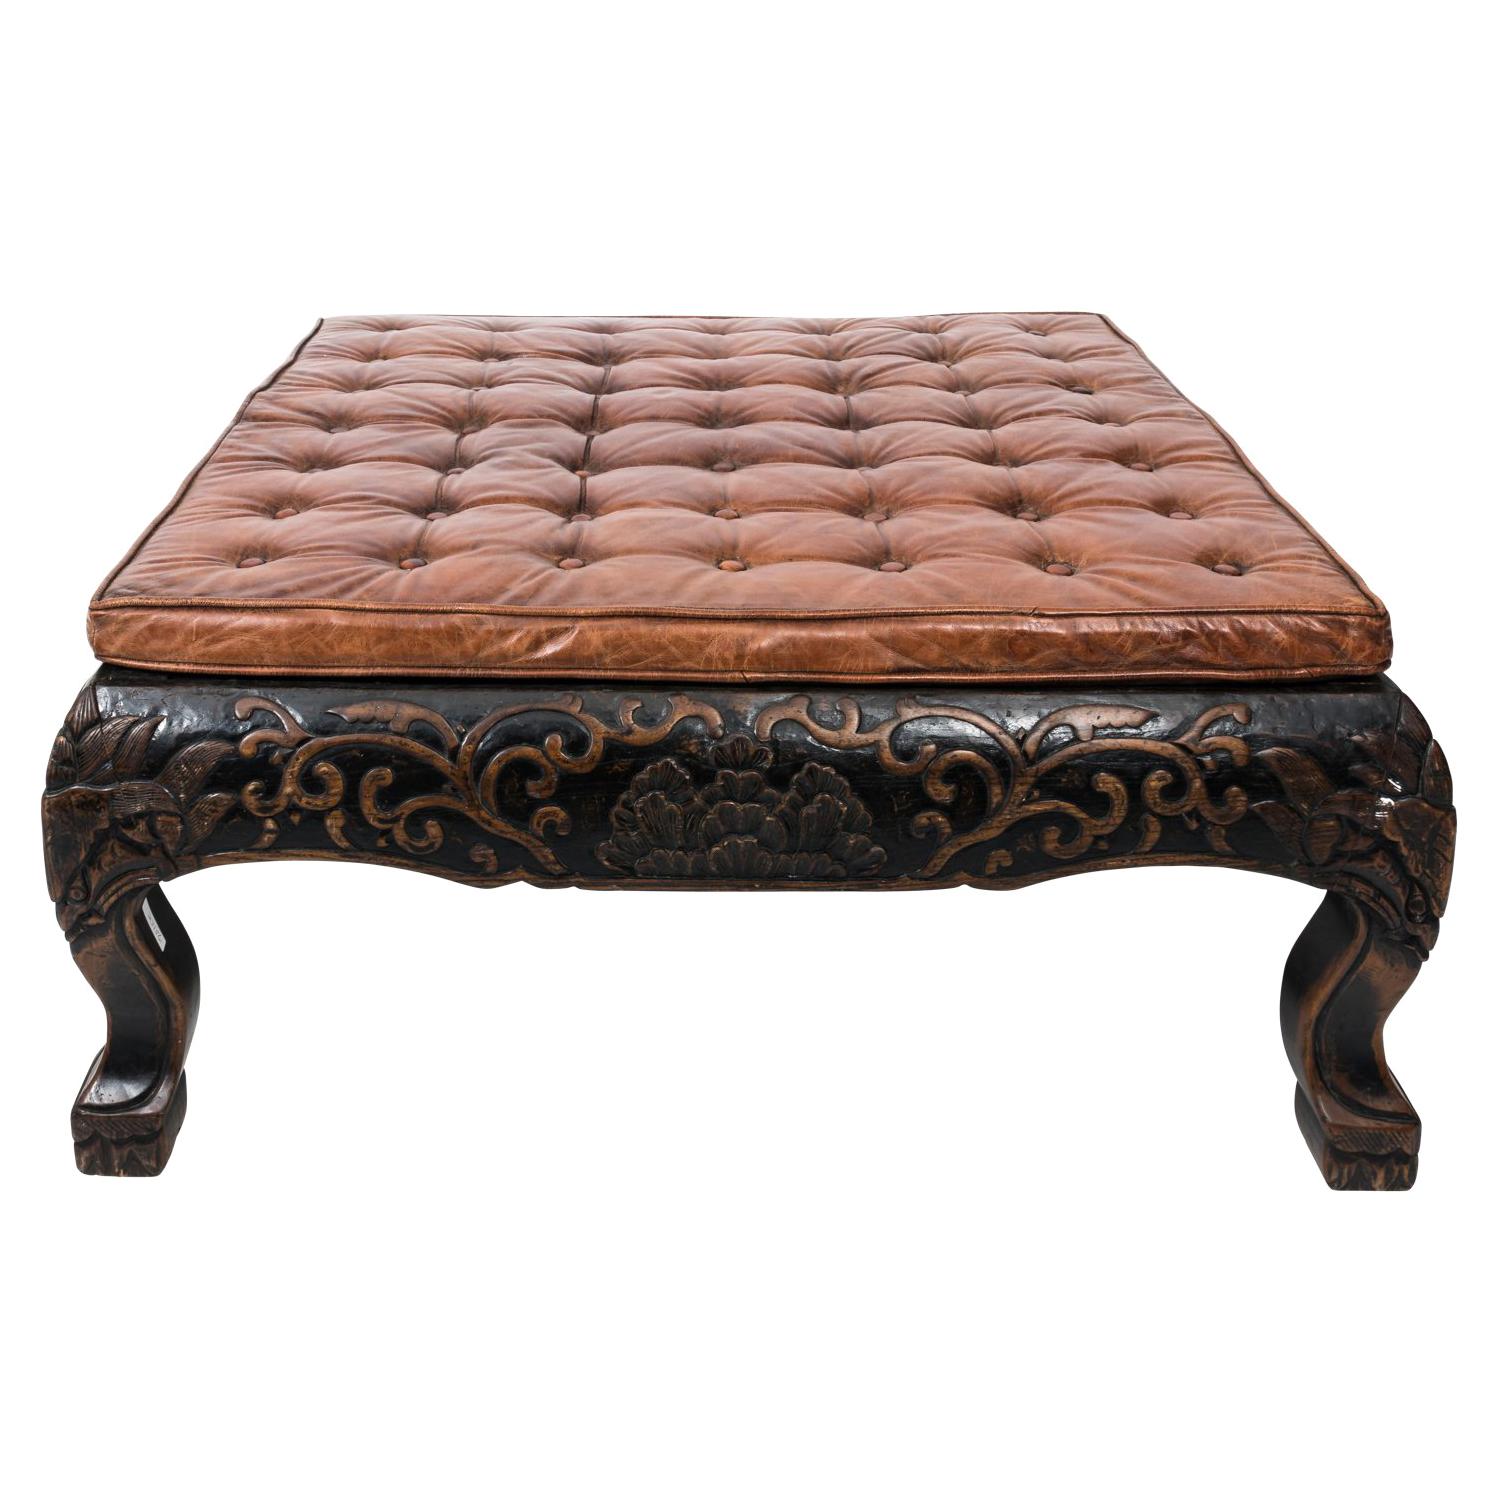 Carved Leather Tufted Ottoman